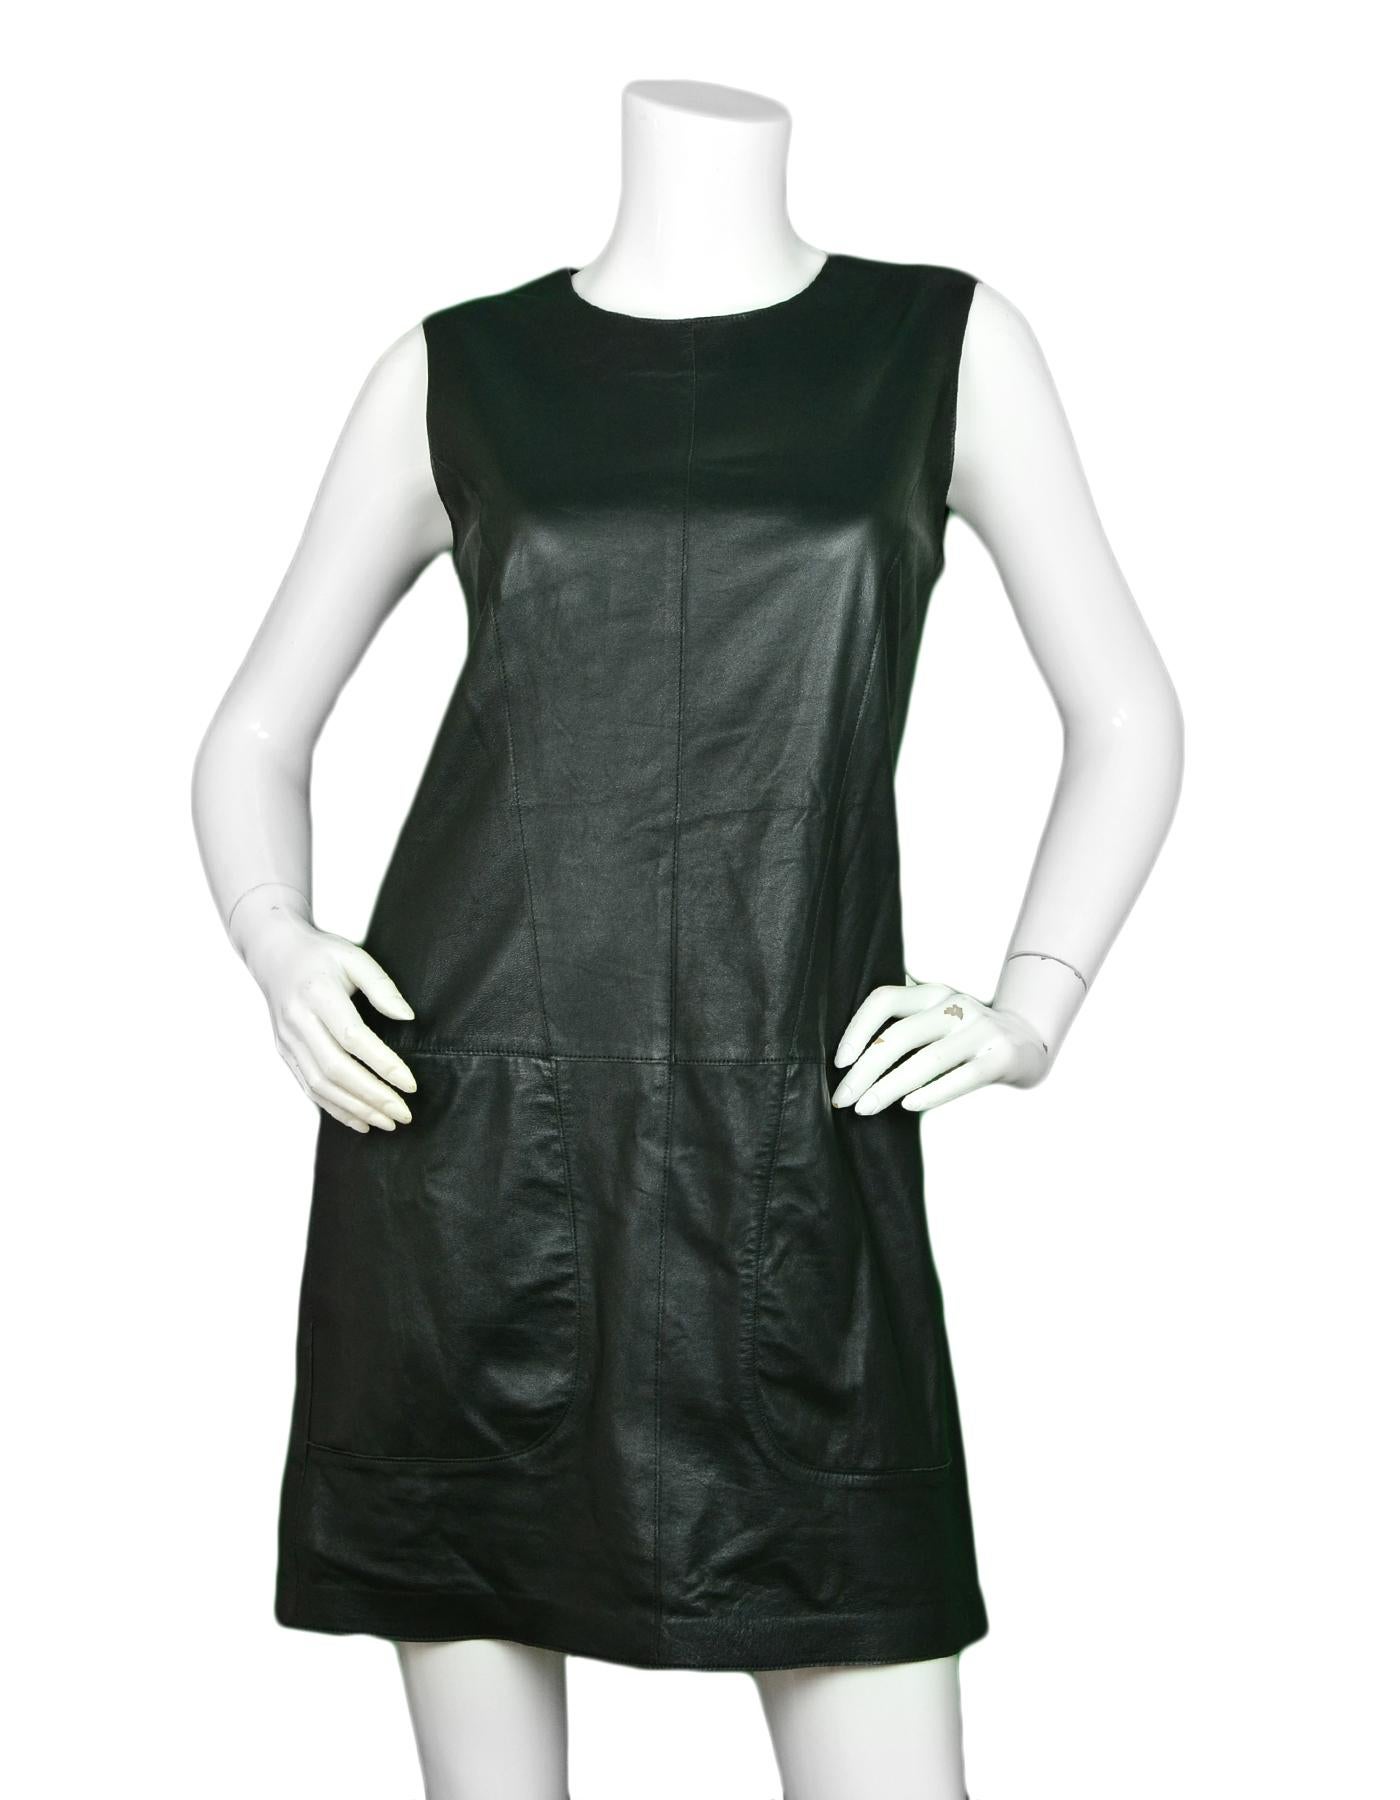 Vince Green Leather Sleeveless Dress sz 6

Made In: China
Color: Hunter green 
Materials: Leather (missing composition tag)
Opening/Closure: Back hidden zipper 
Overall Condition: Very good pre-owned condition, with light creasing to underarms,